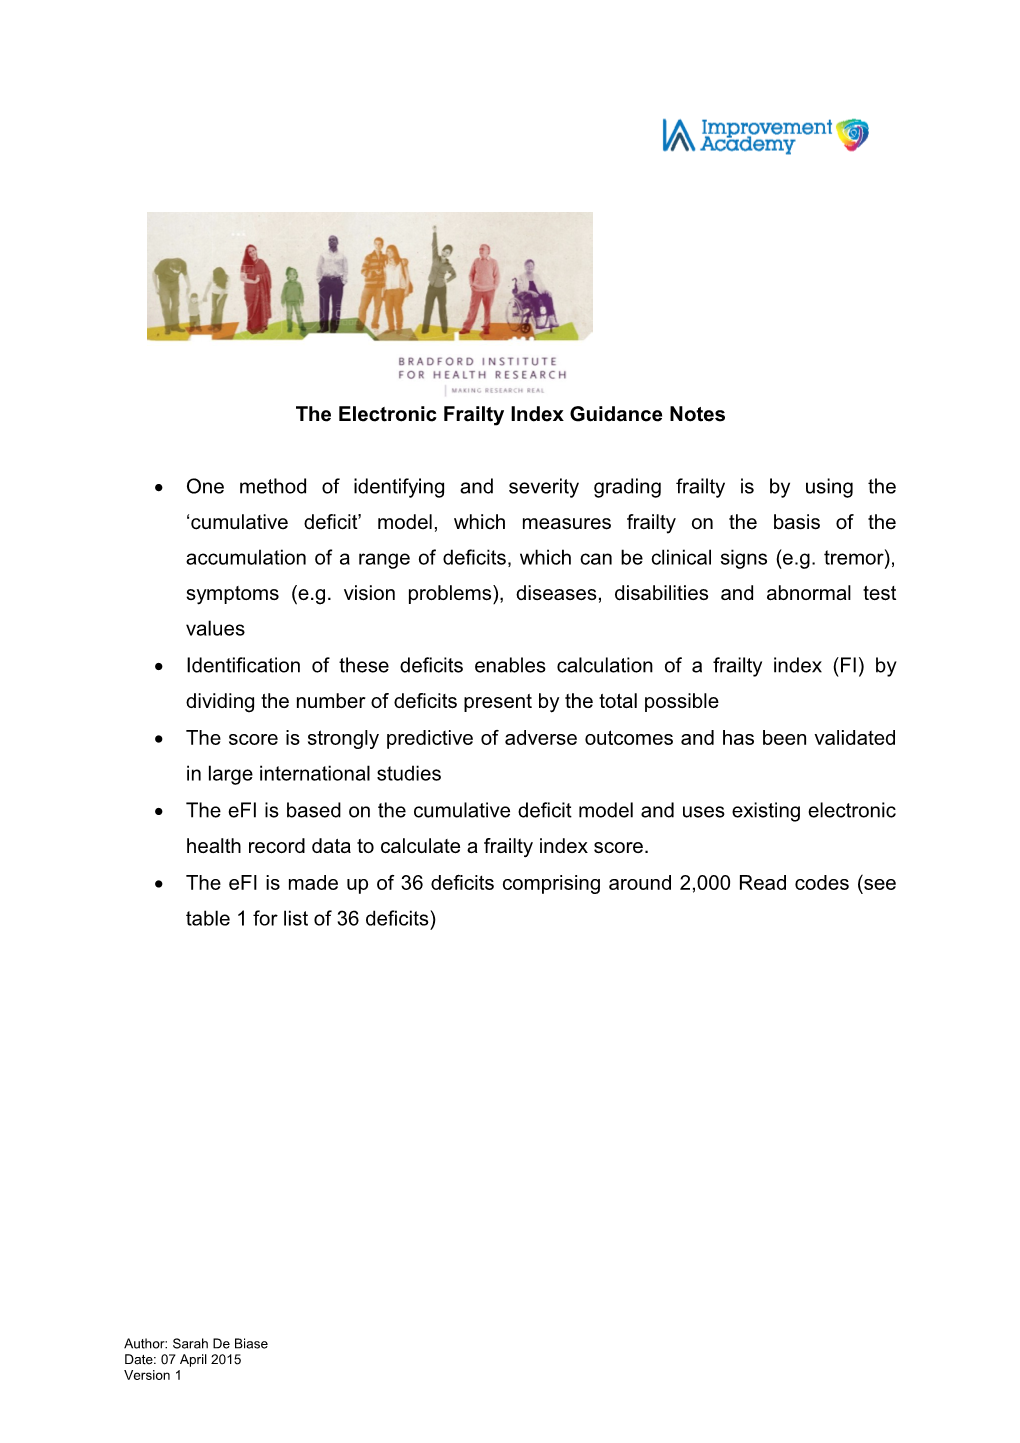 The Electronic Frailty Index Guidance Notes